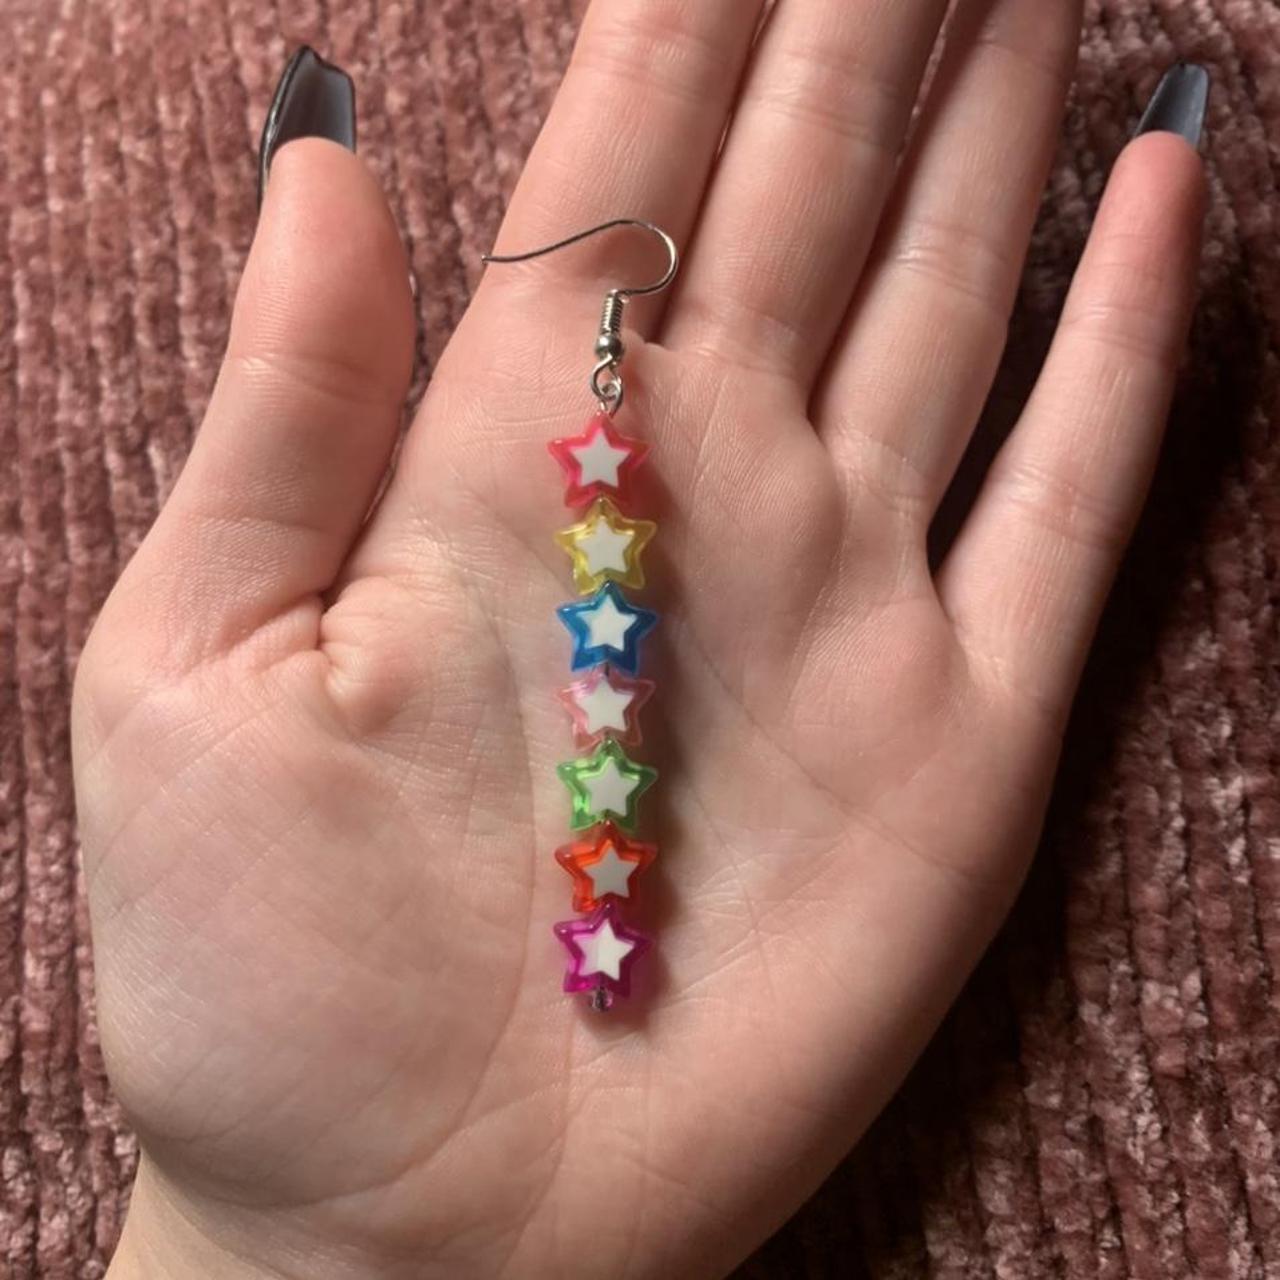 Product Image 2 - Multicolored star earrings! 🦋

These earrings